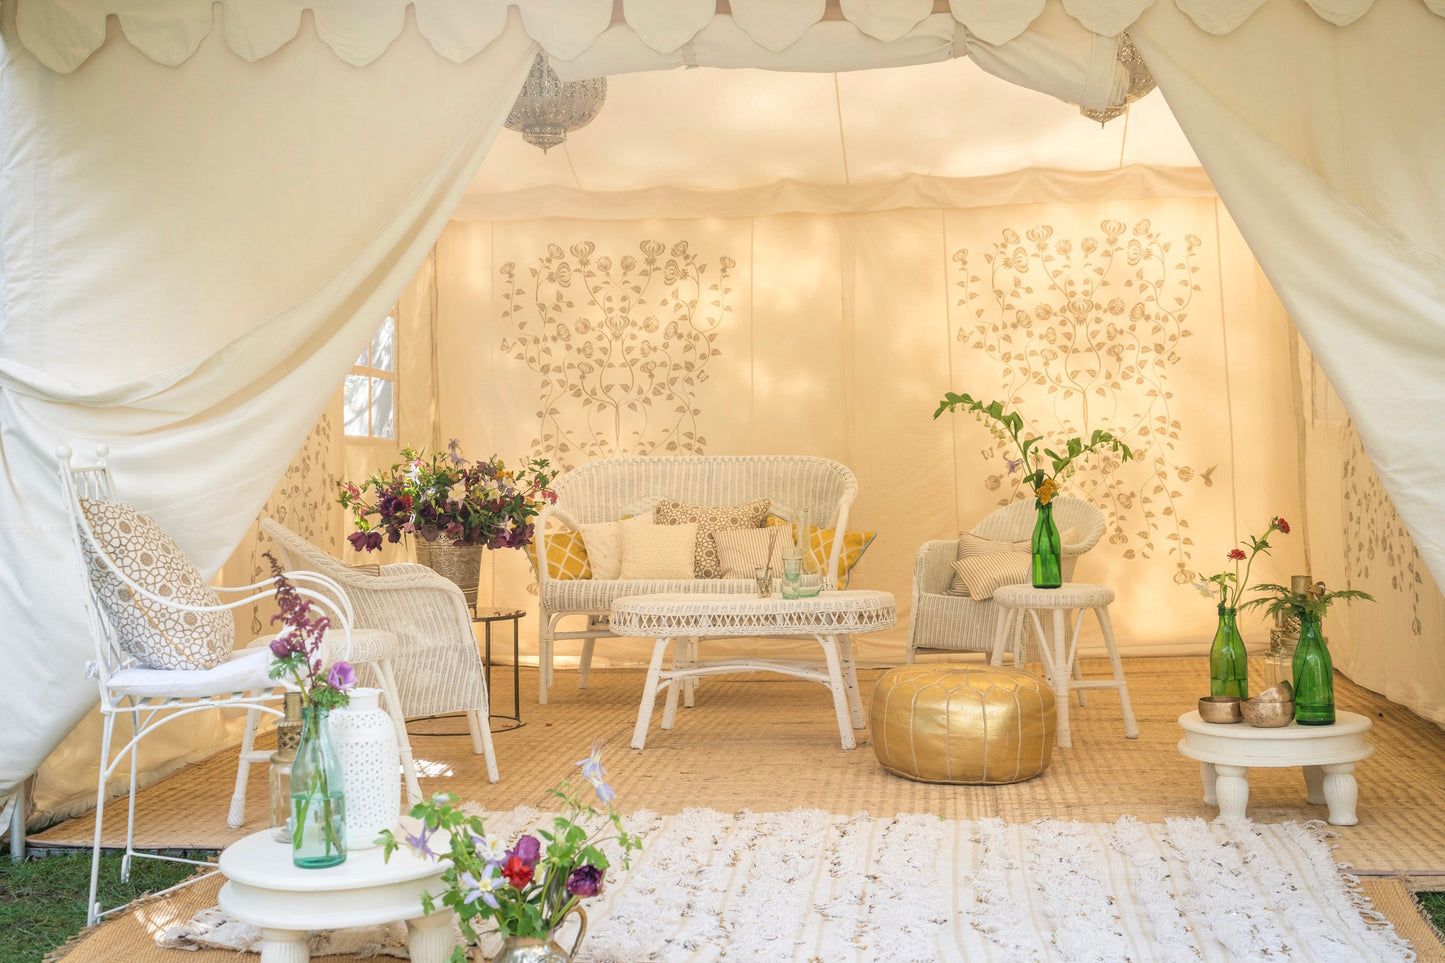 Lily Pond Tent